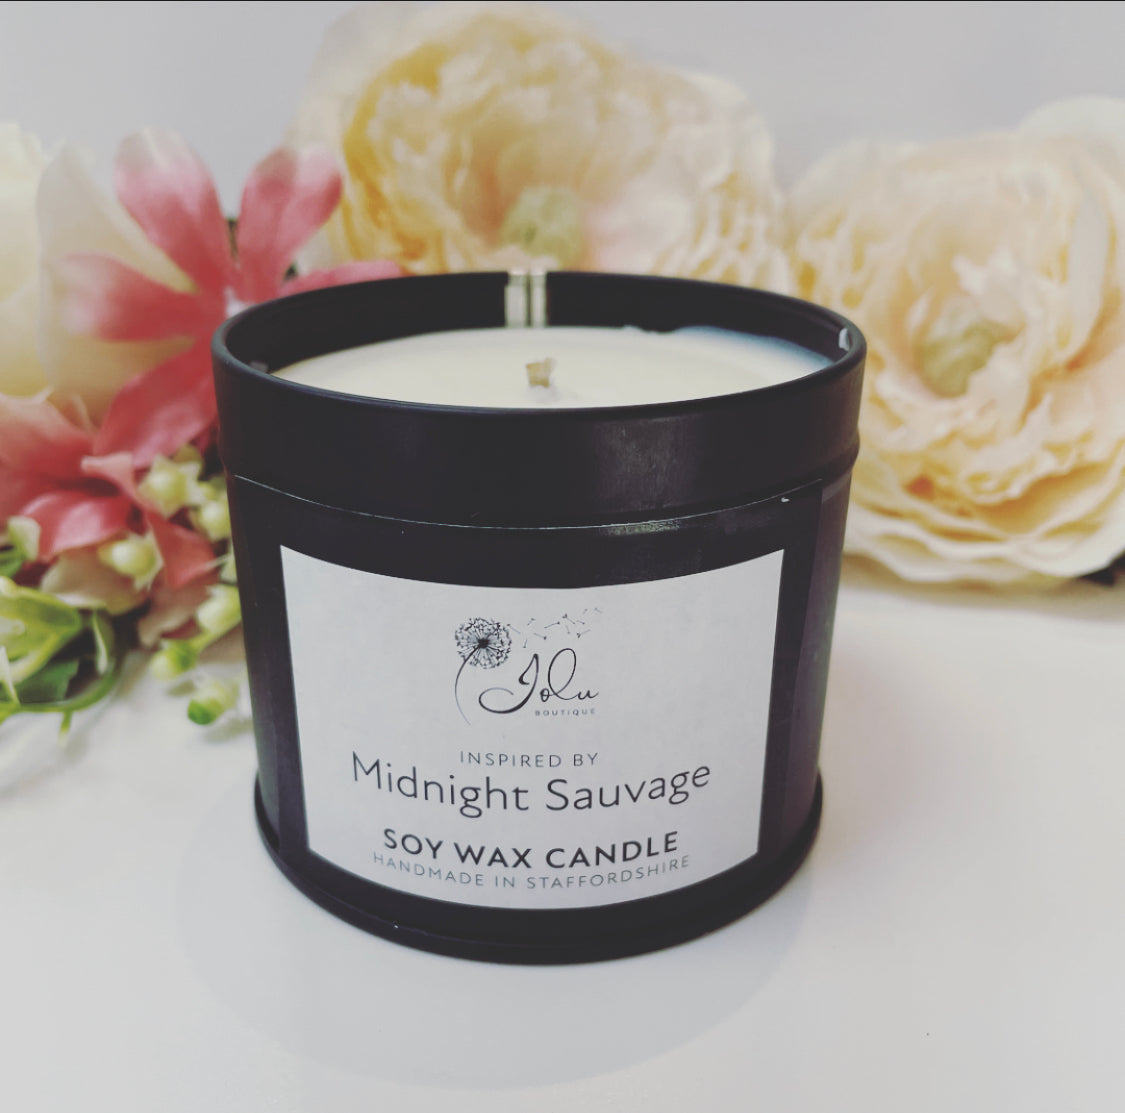 Jolu Boutique Midnight Sauvage Soy Wax Candle - Black Tin